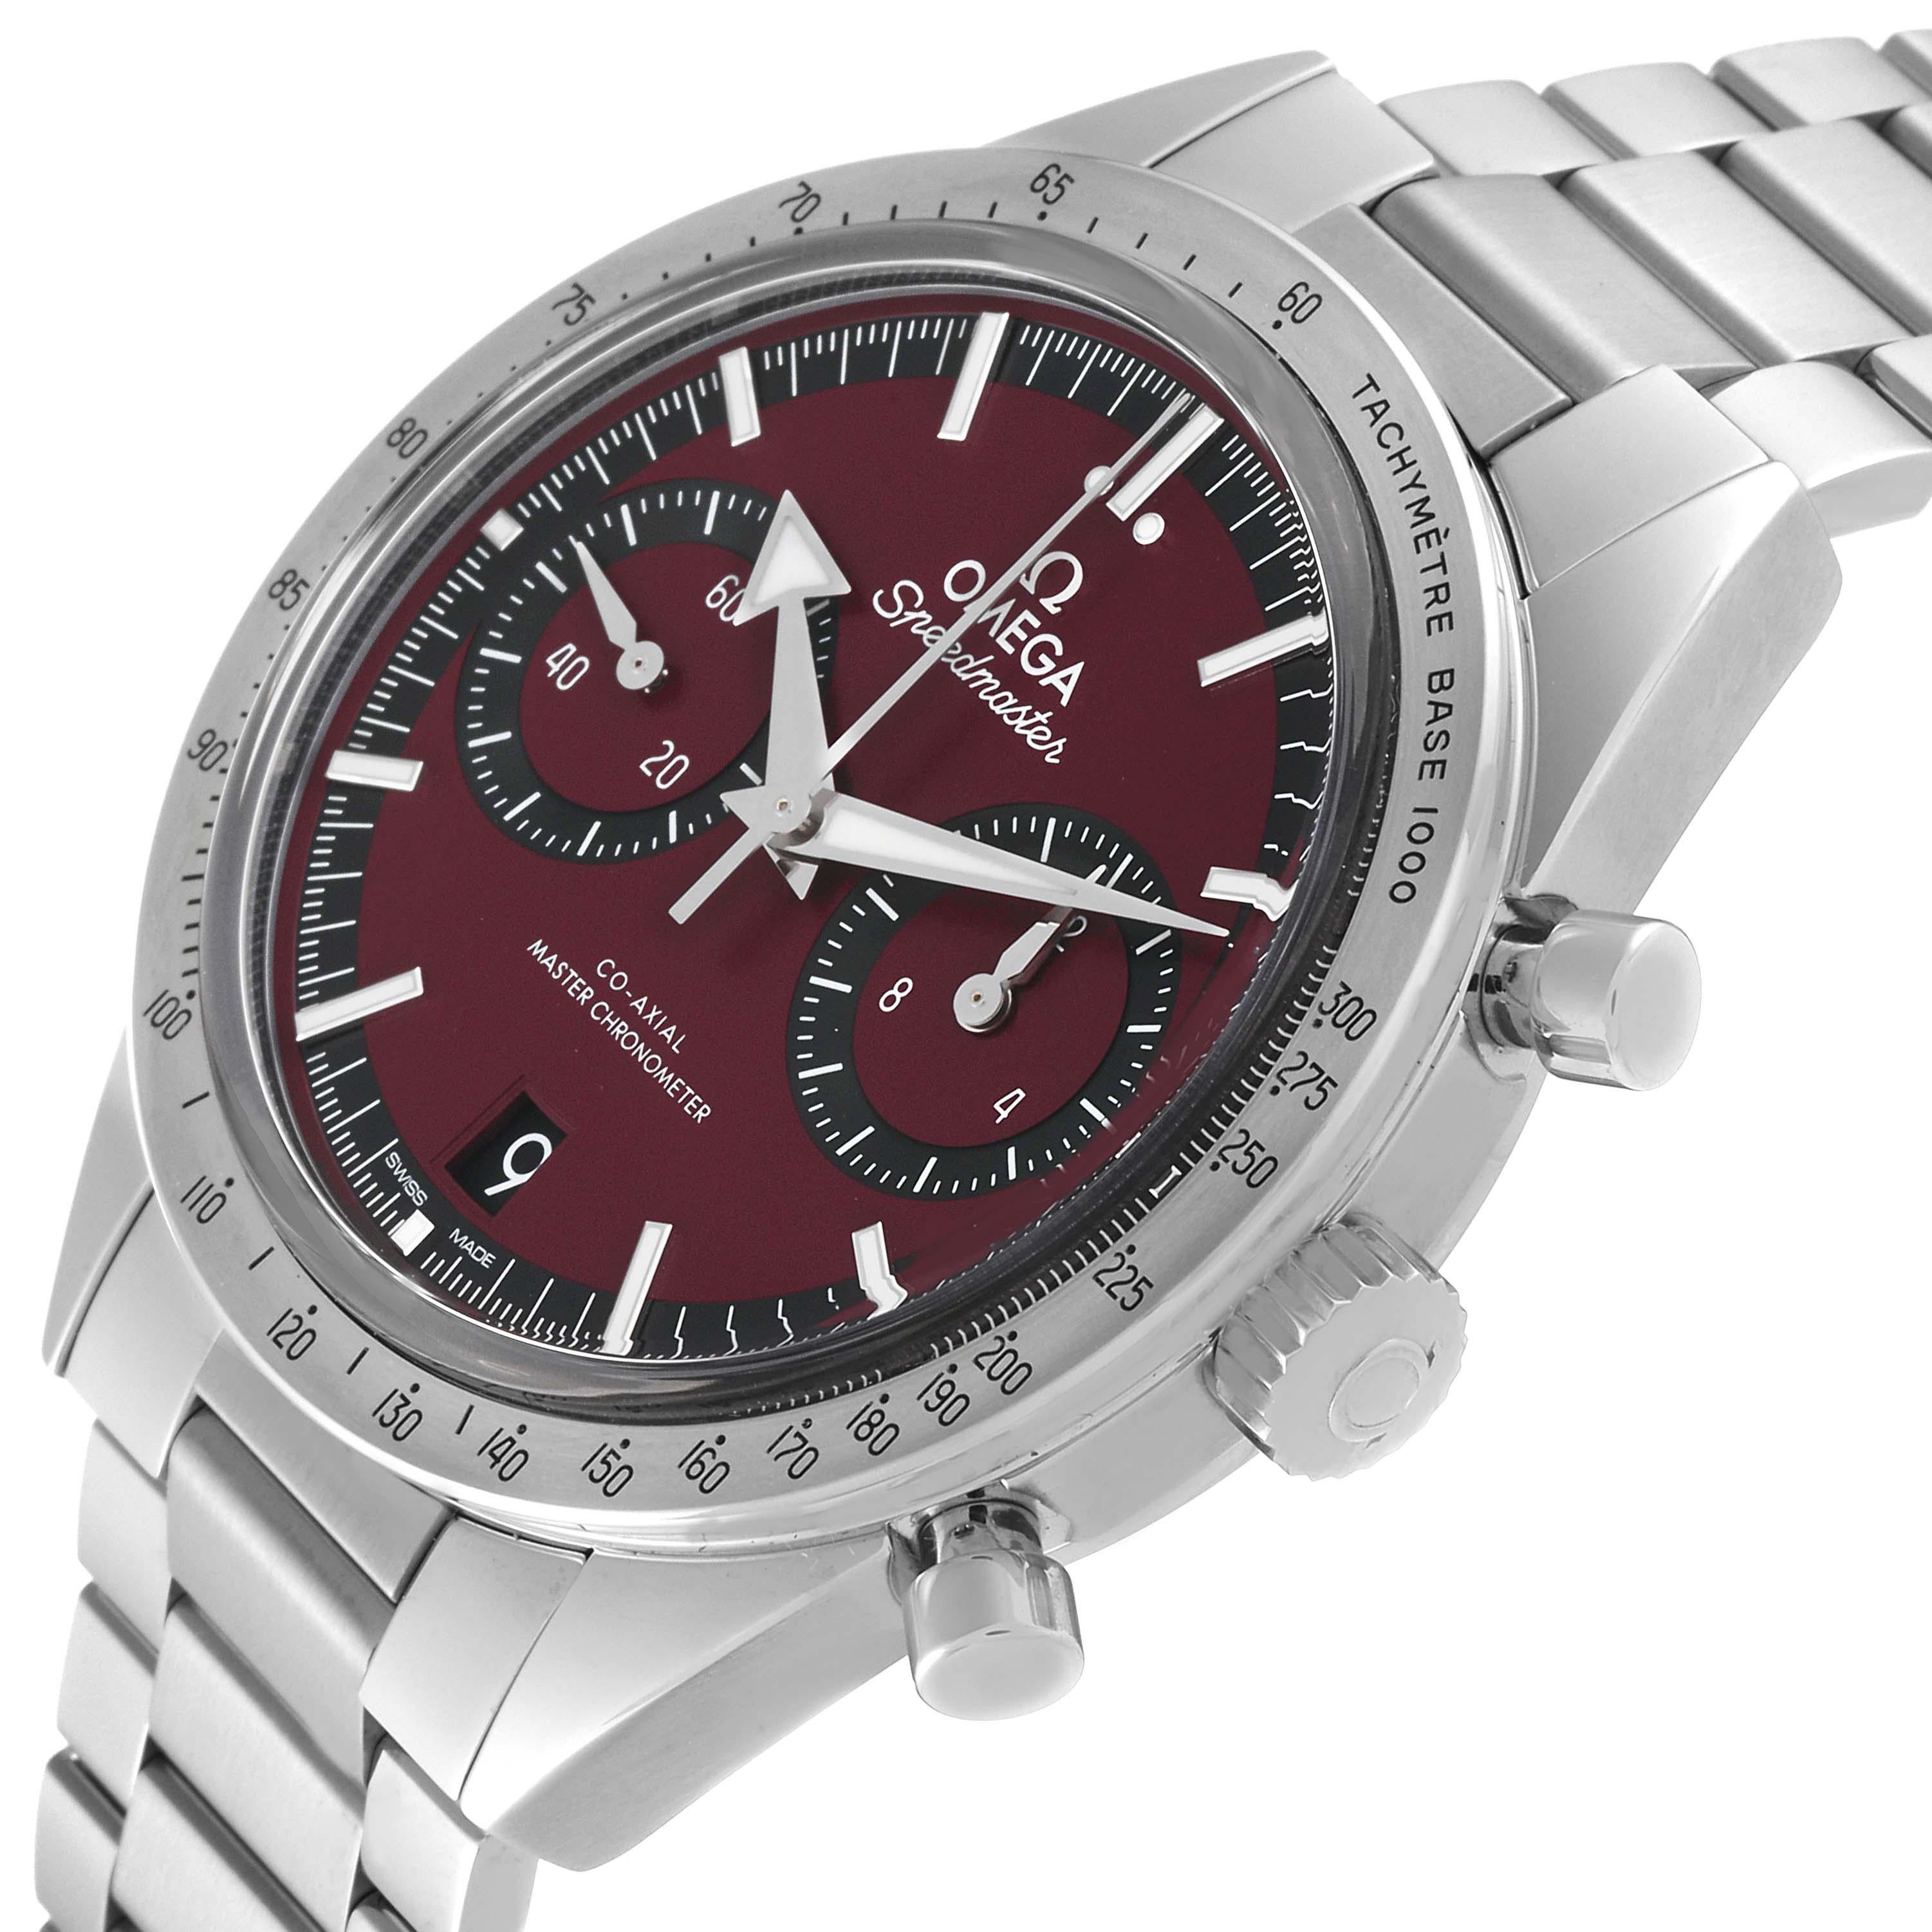 Omega Speedmaster 57 Steel Mens Watch 332.10.41.51.11.001 Unworn. Manual-winding chronograph with column wheel and CoAxial escapement. Certified Master Chronometer, approved by METAS, resistant to magnetic fields reaching 15,000 gauss. Silicon